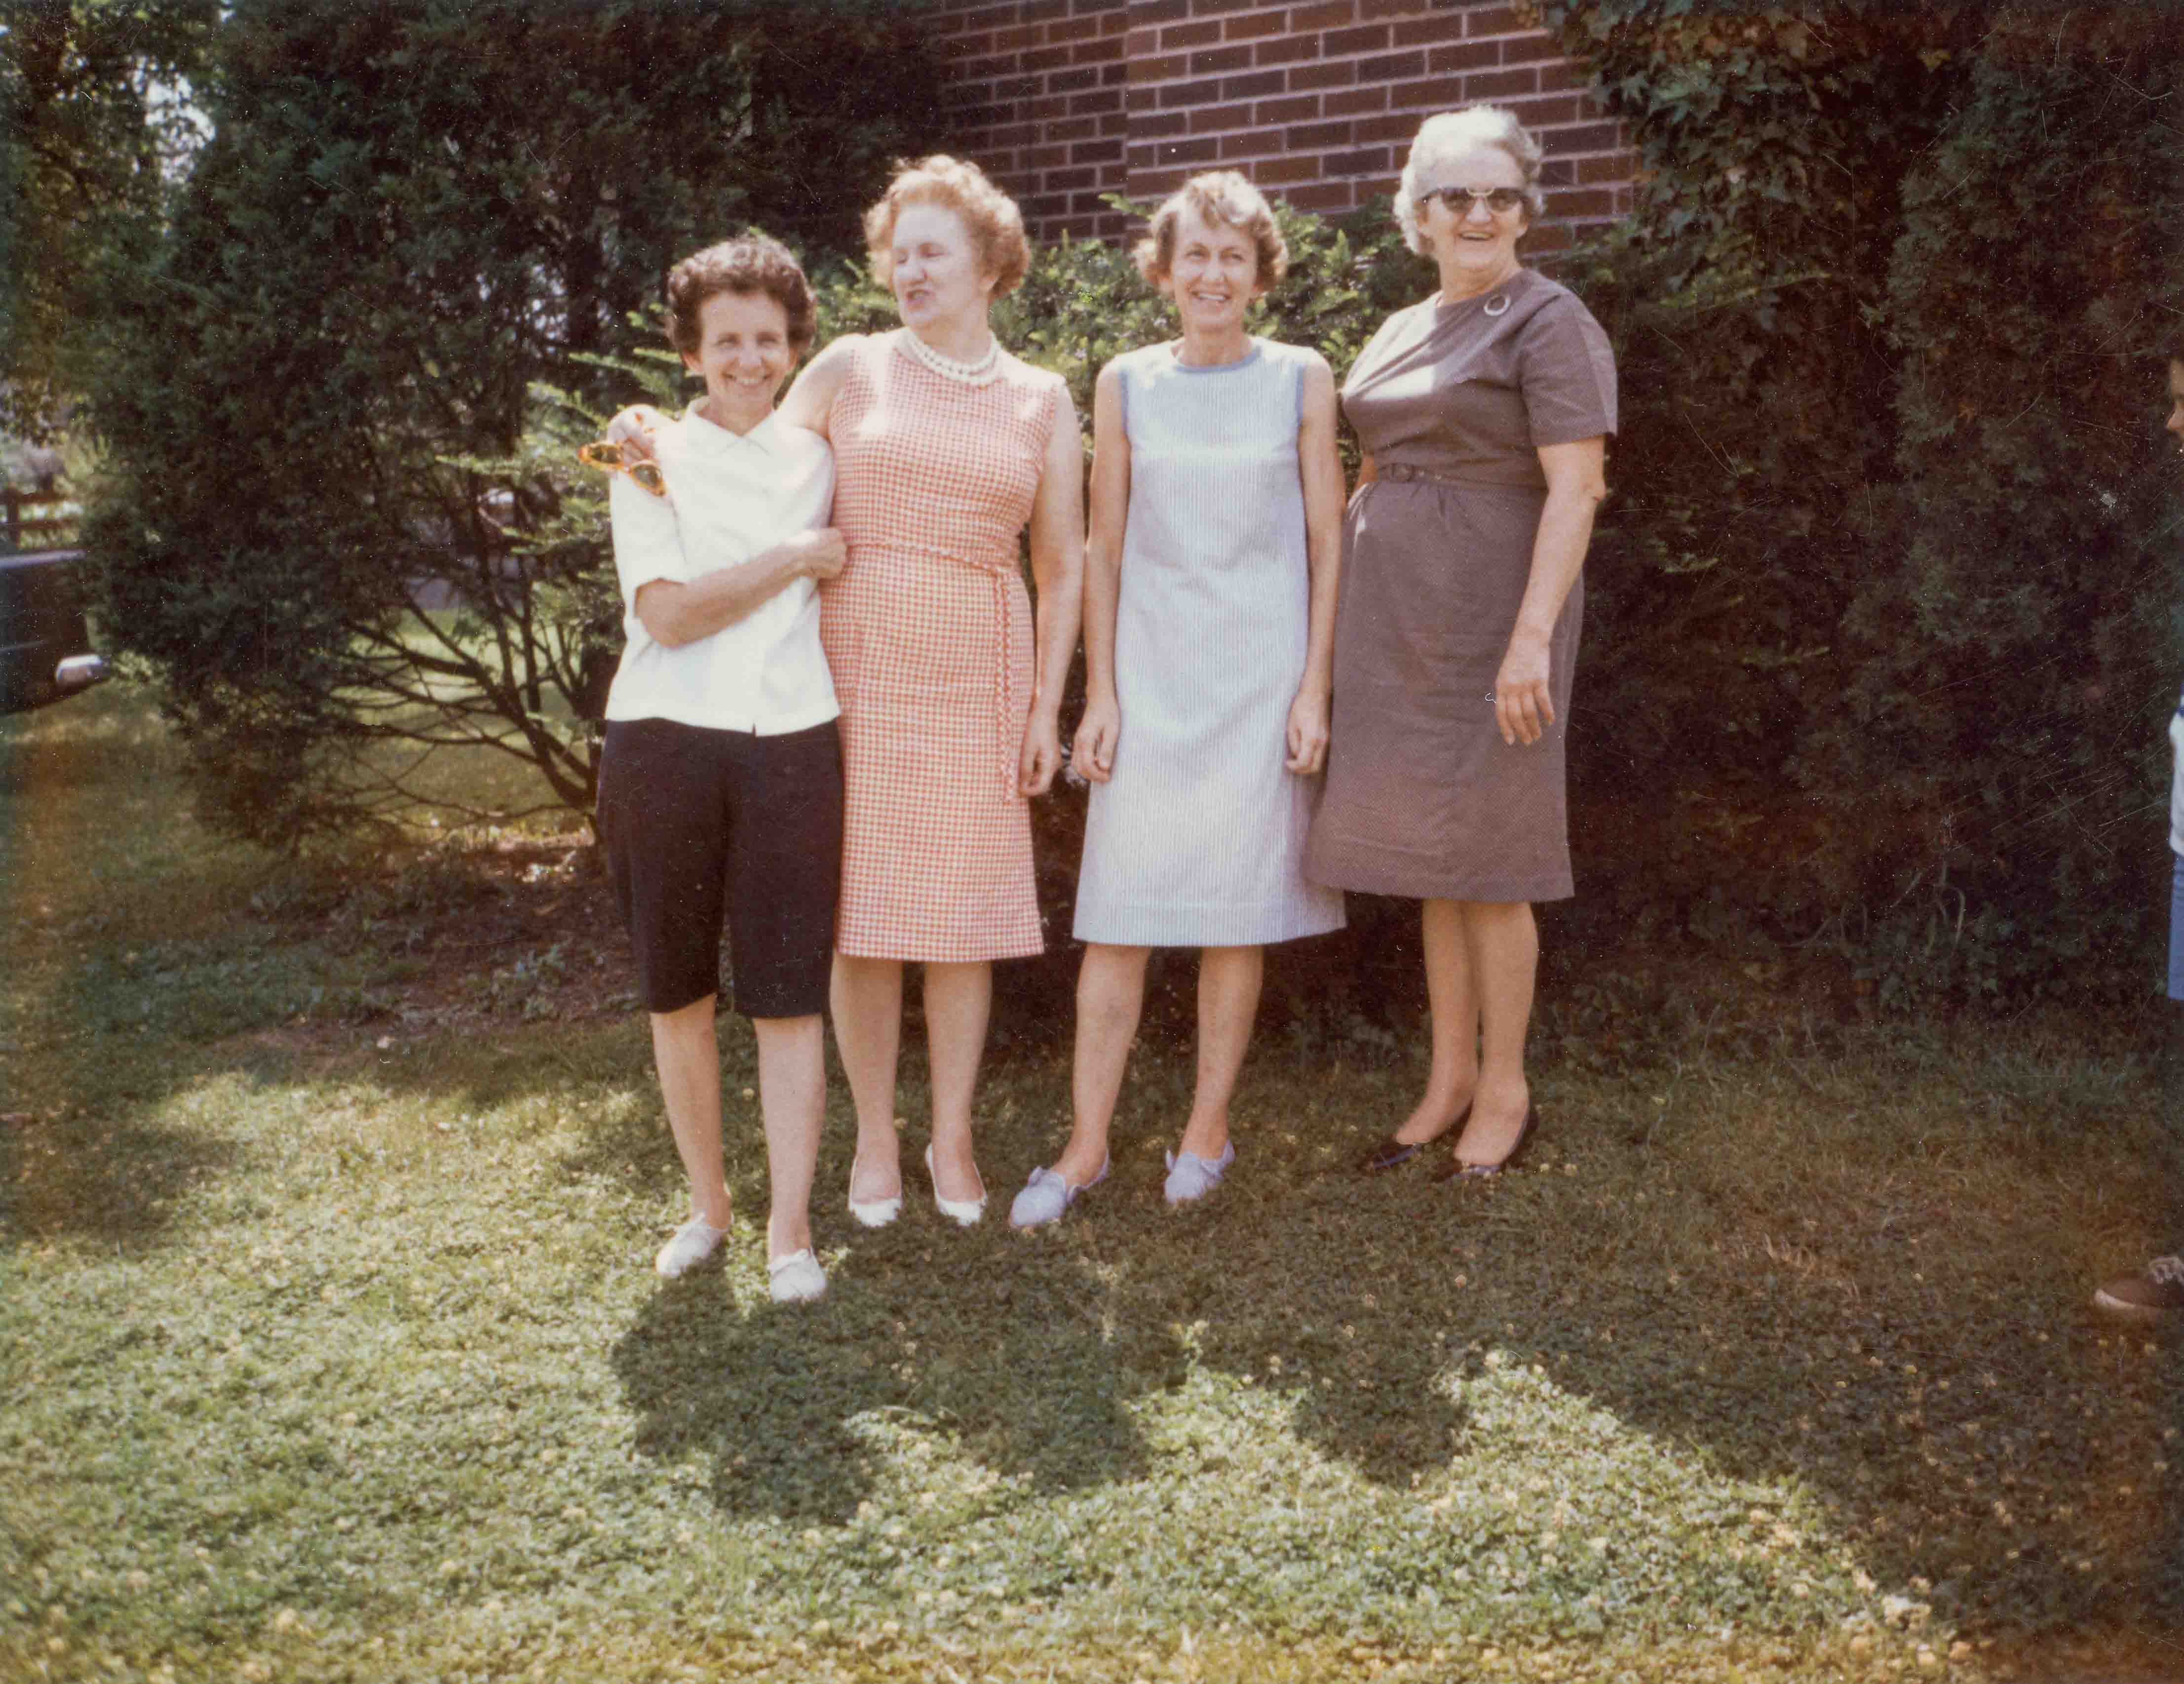 Pauline Brooks Daugherty,  Hazel Brooks Houchin, Mary Doris Brooks Gaston,
Iris Brooks Warren
On the back Gramma wrote:  How do you like my red hair?  I had a brown rinse but it turned red!
Location: Probably at the Gaston home in Buchannon WV
Source:  Hazel Brooks Betler Houchin
Date:  1962 (approx)